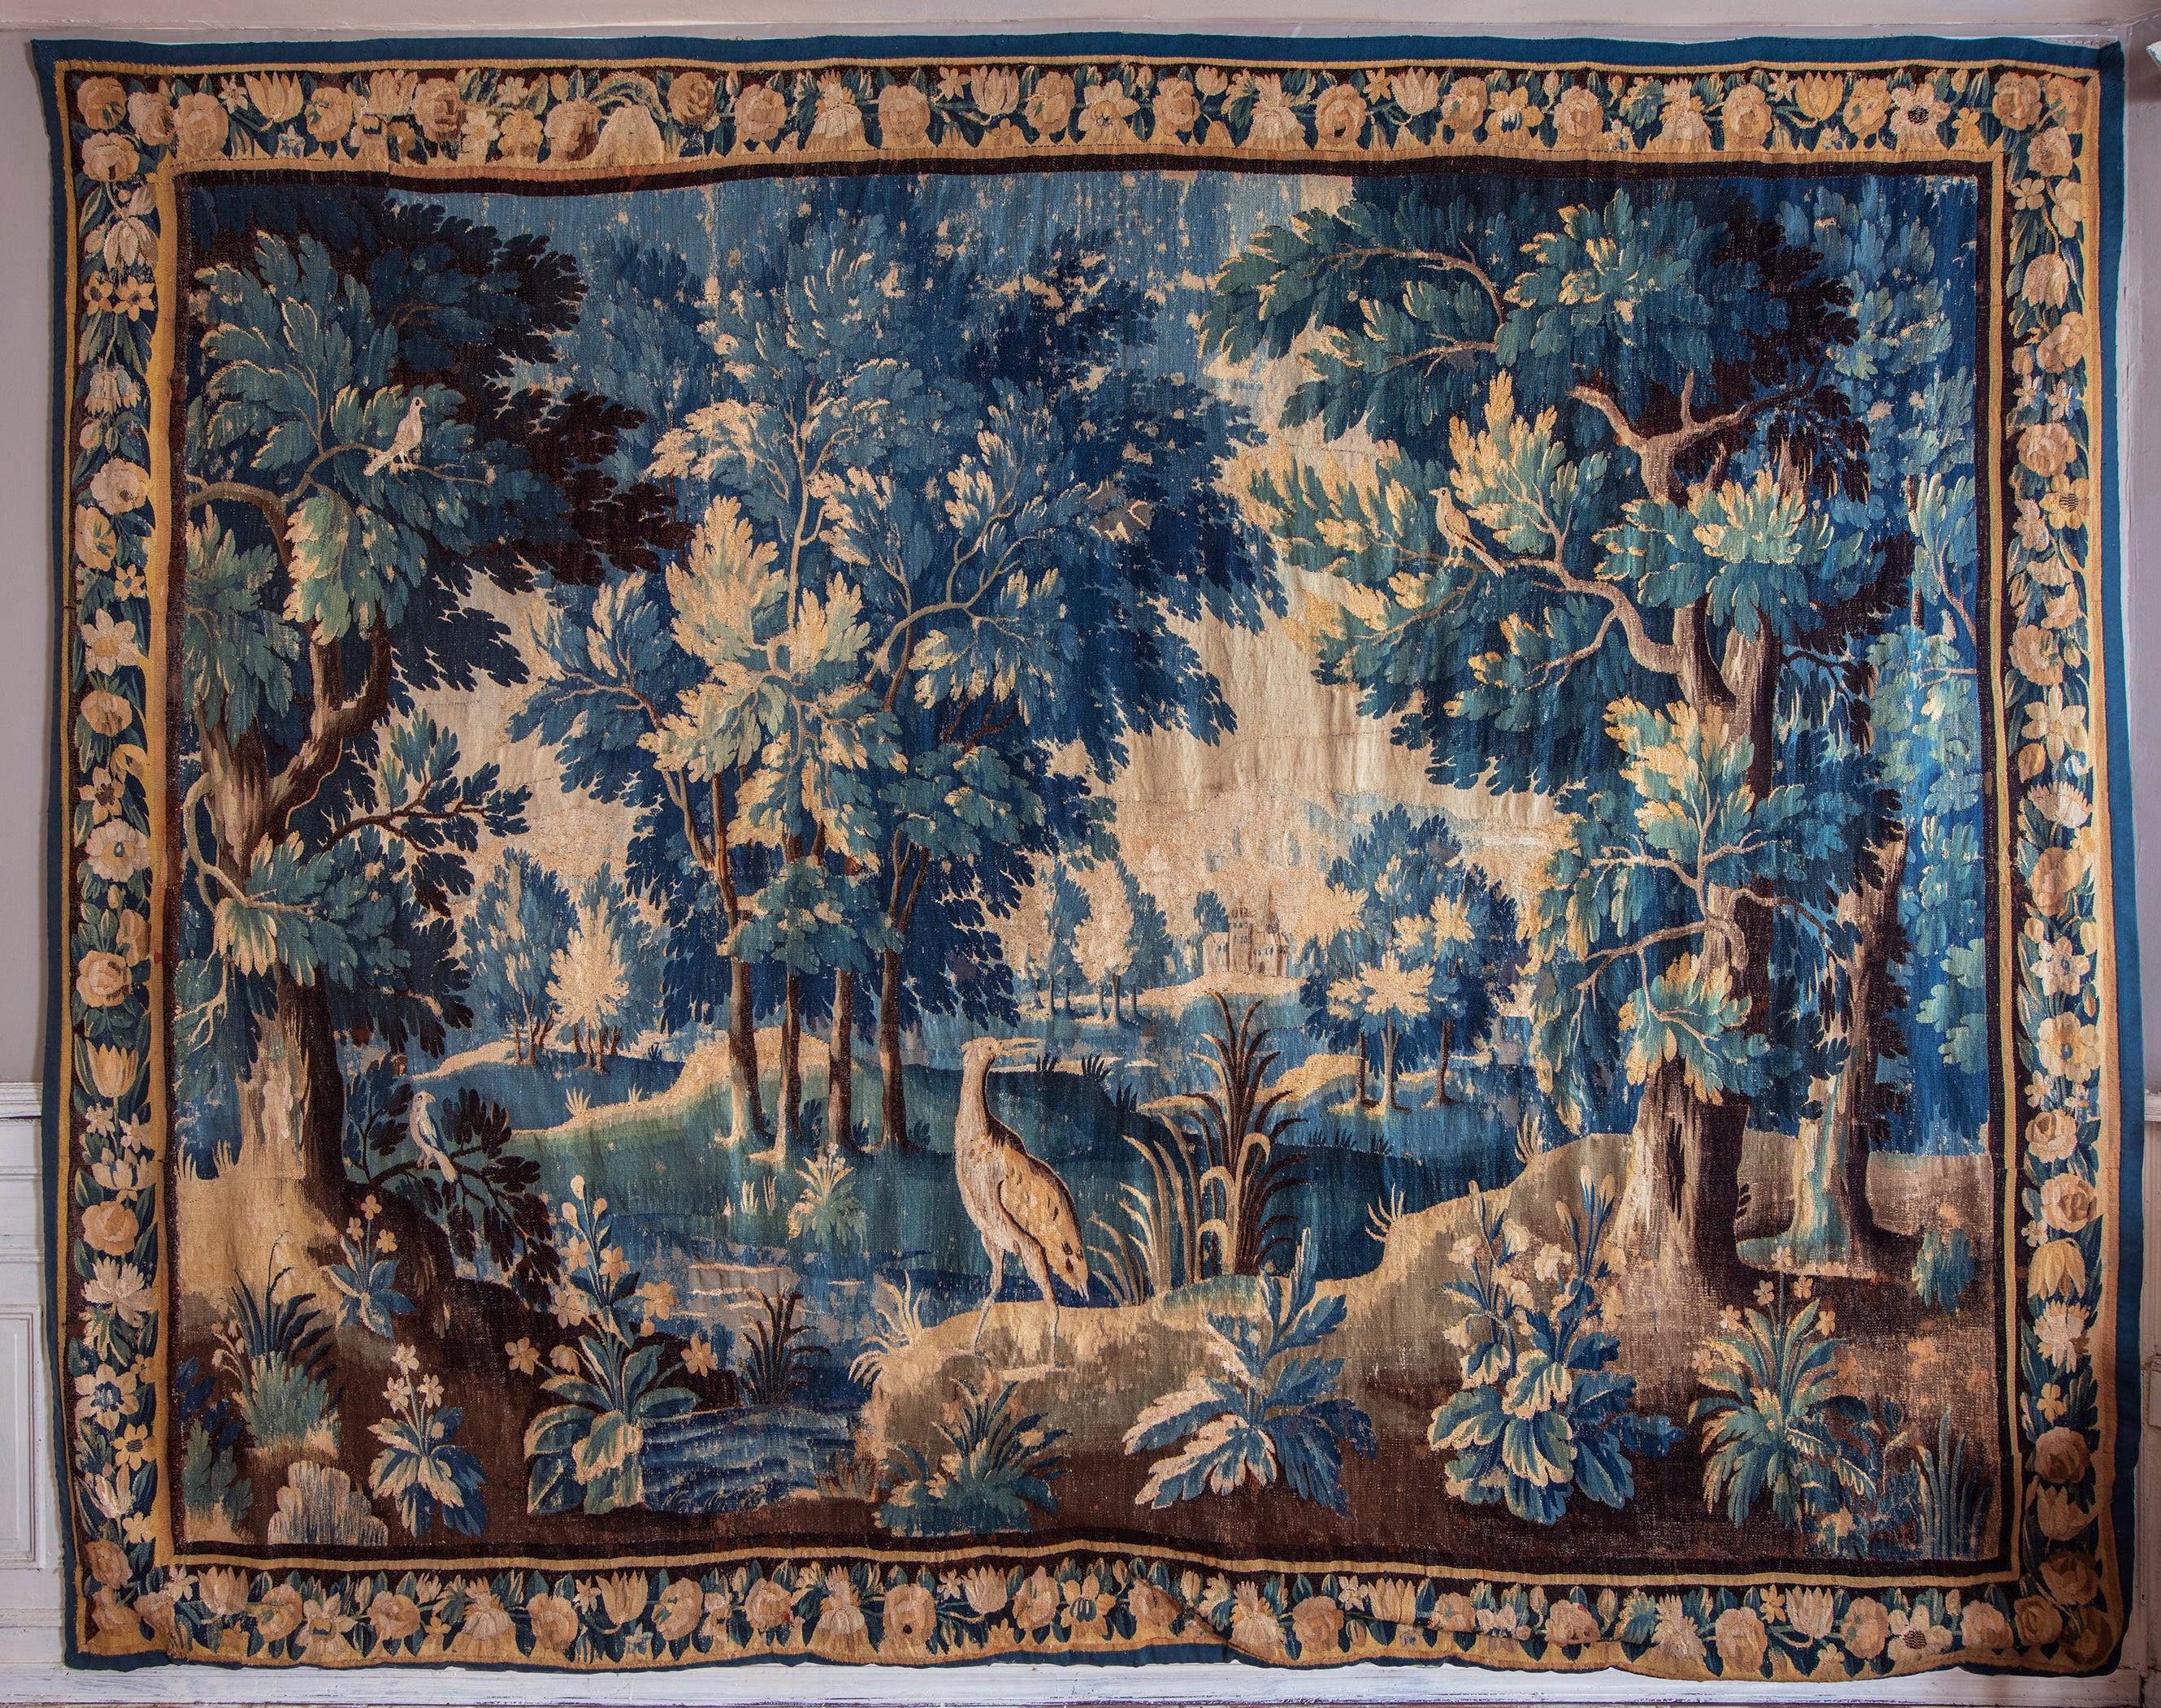 18th Century French Aubusson Verdure Tapestry